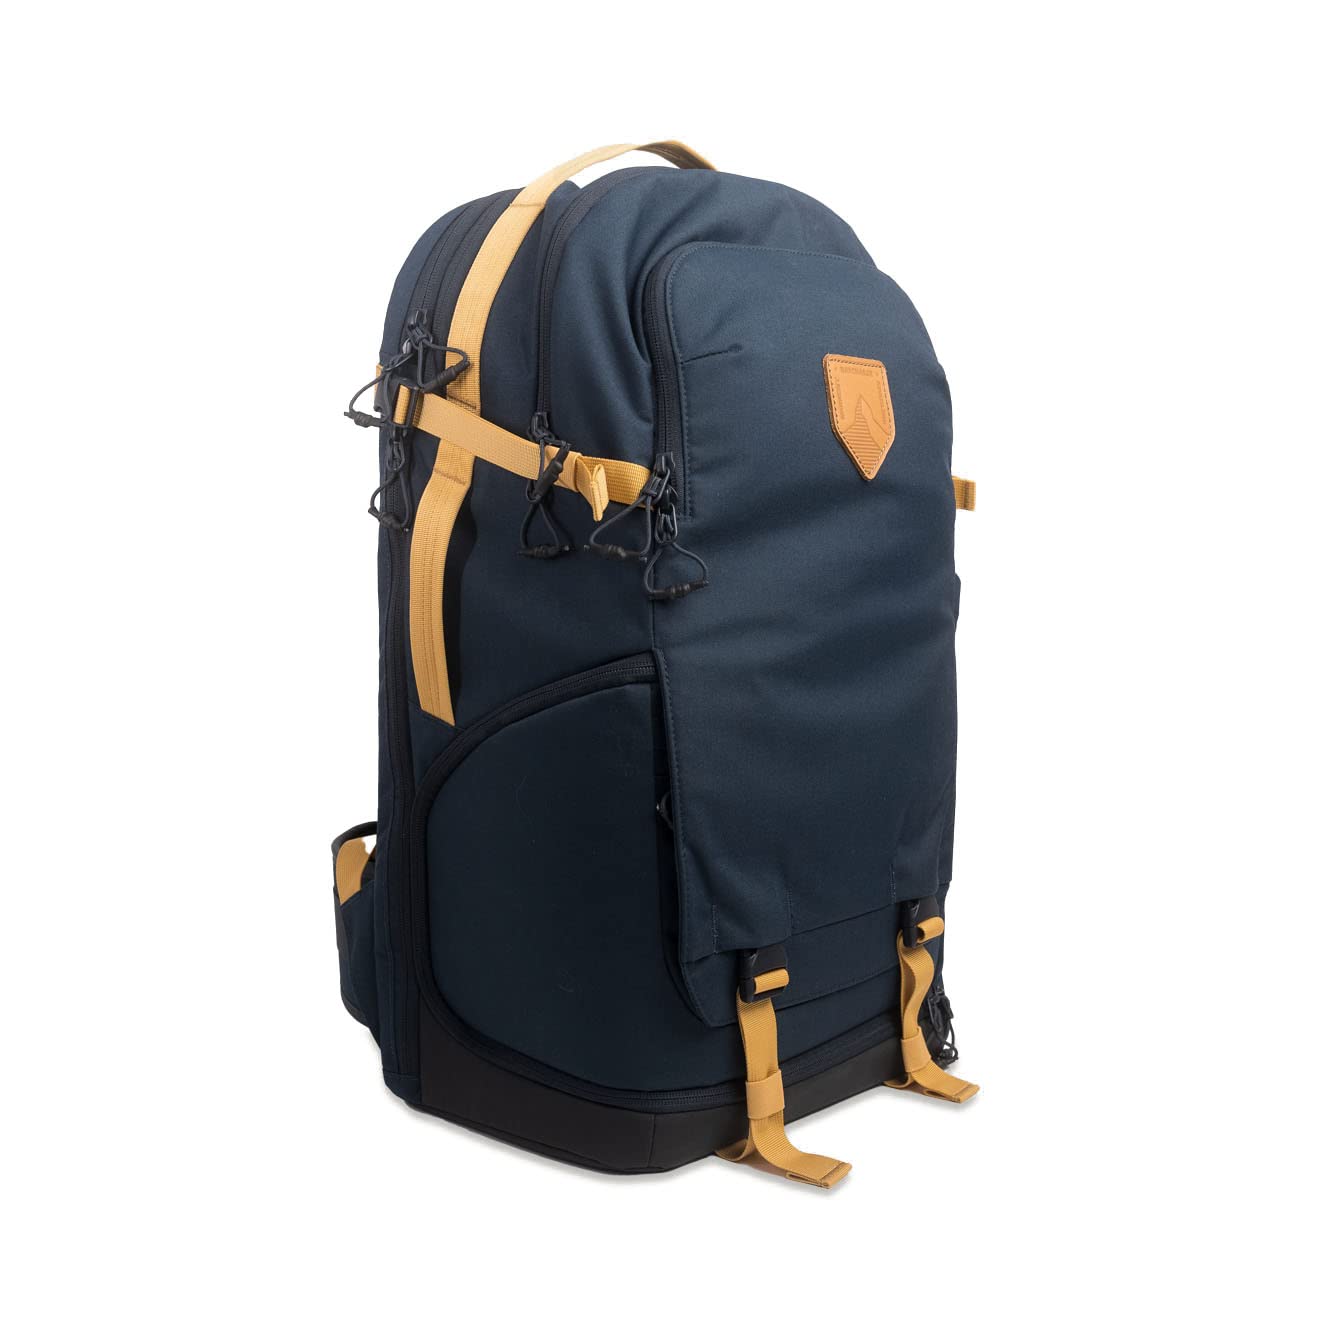 Moment DayChaser 35L Travel Camera Backpack - Fits Camera Gear, Lenses, Laptops, & Clothes (Blue)